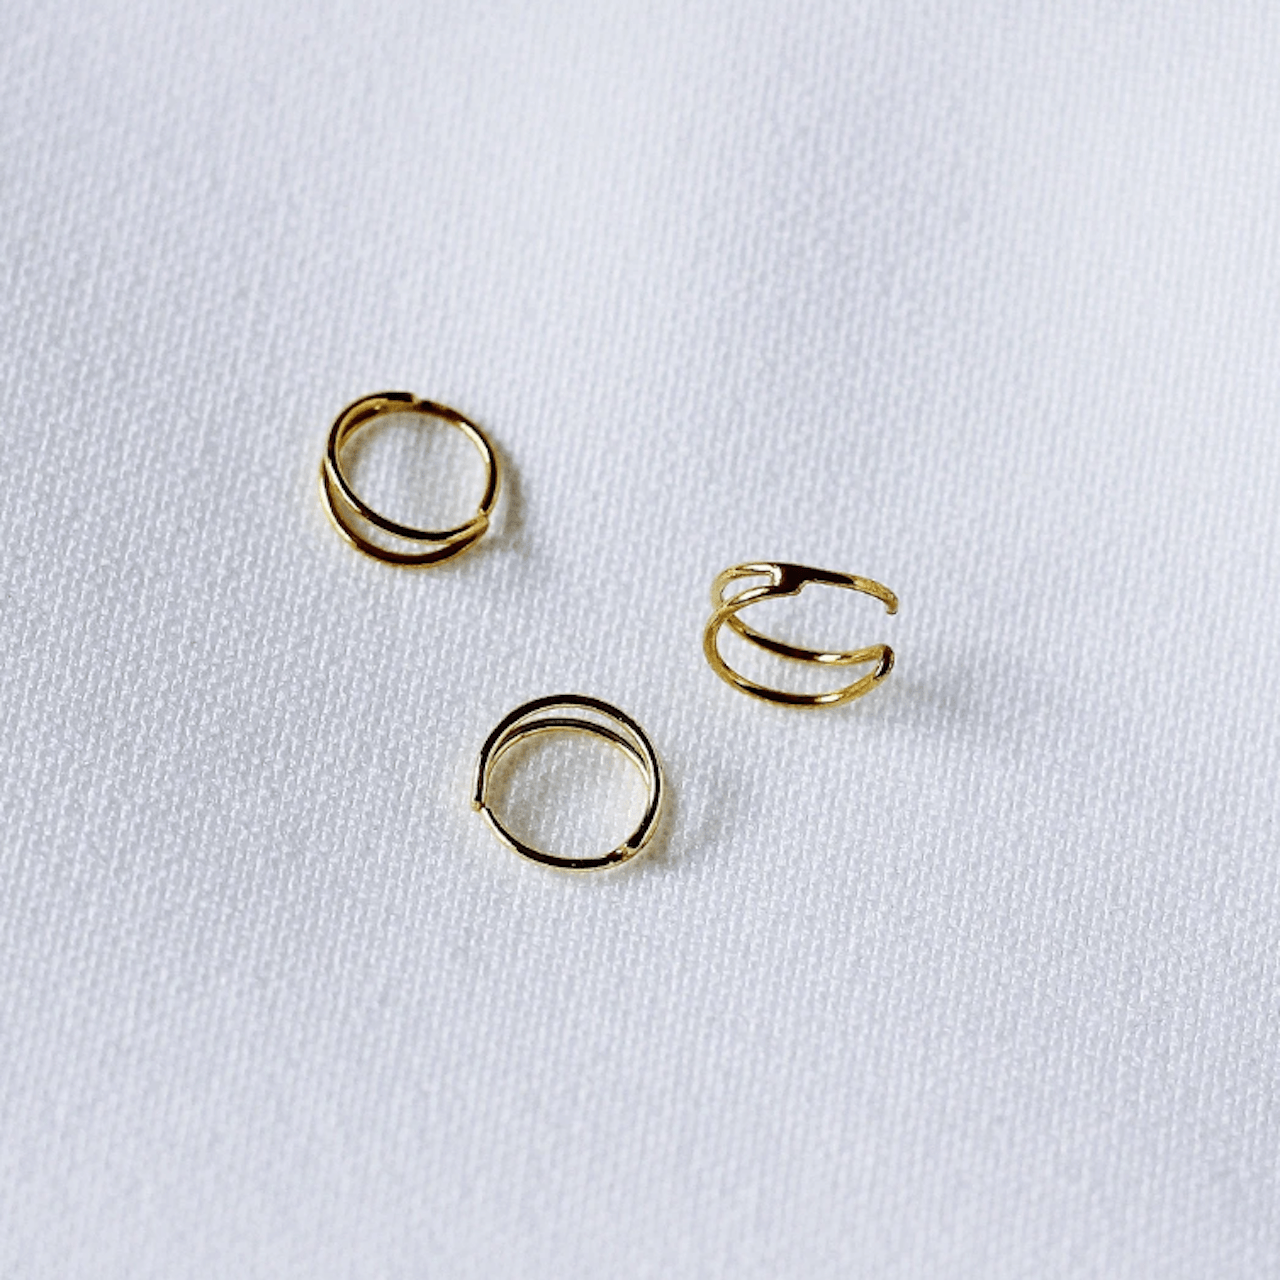 Double Hoop Nose Ring 9k Gold - TinyBox Jewelry